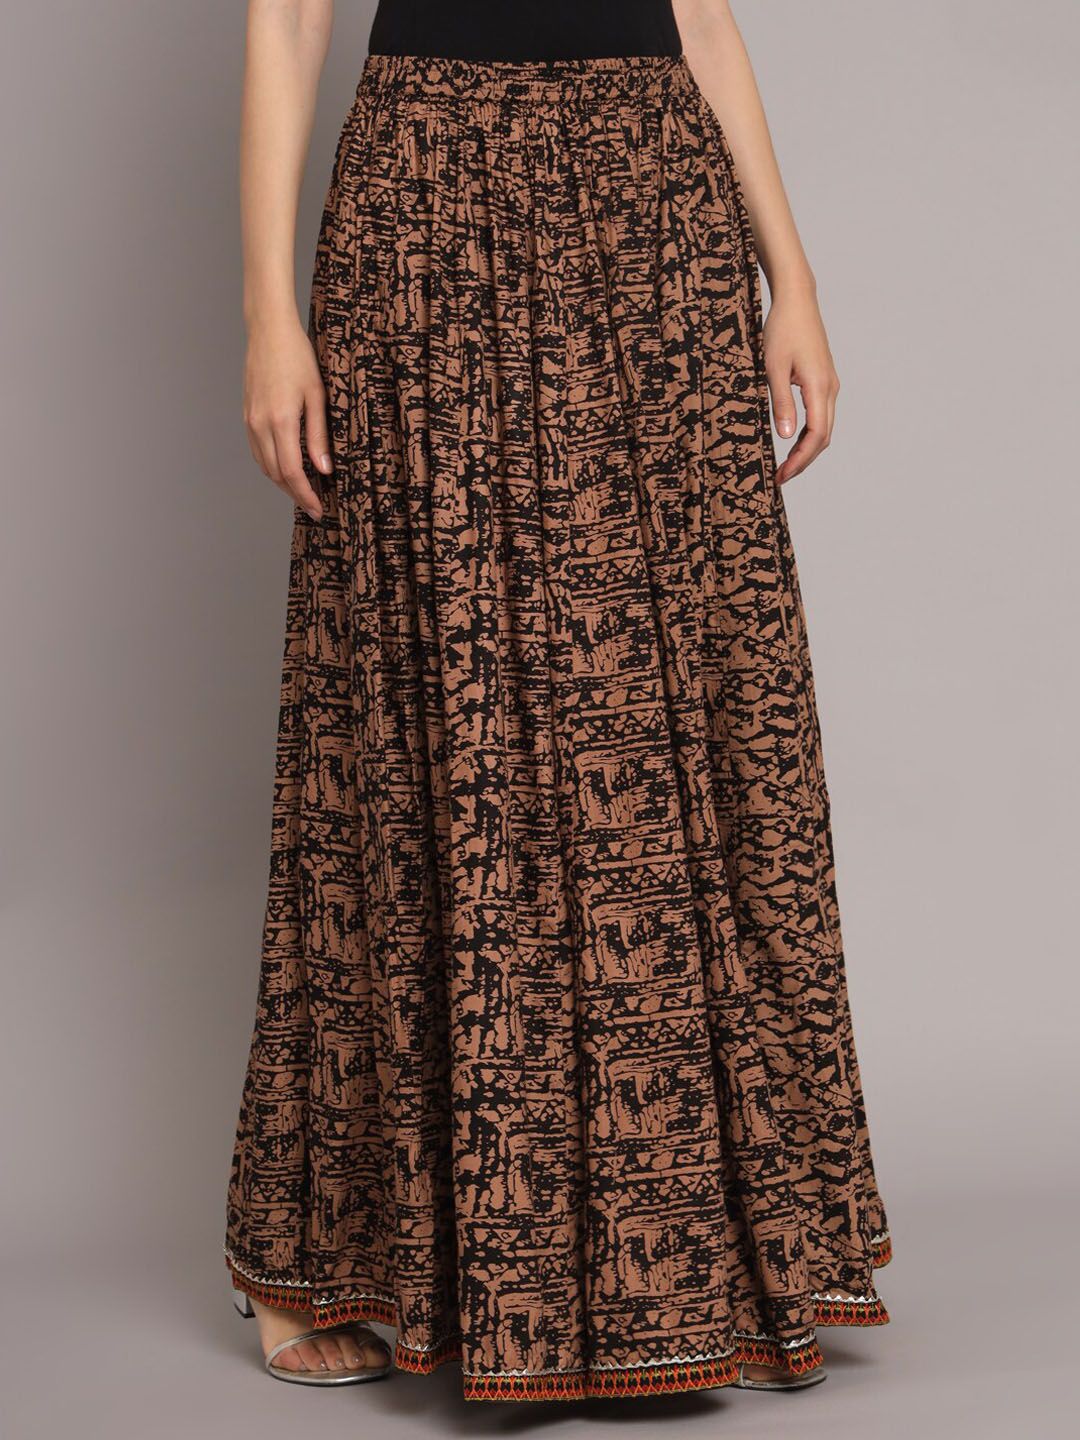 KALINI Abstract Printed Maxi Skirts Price in India